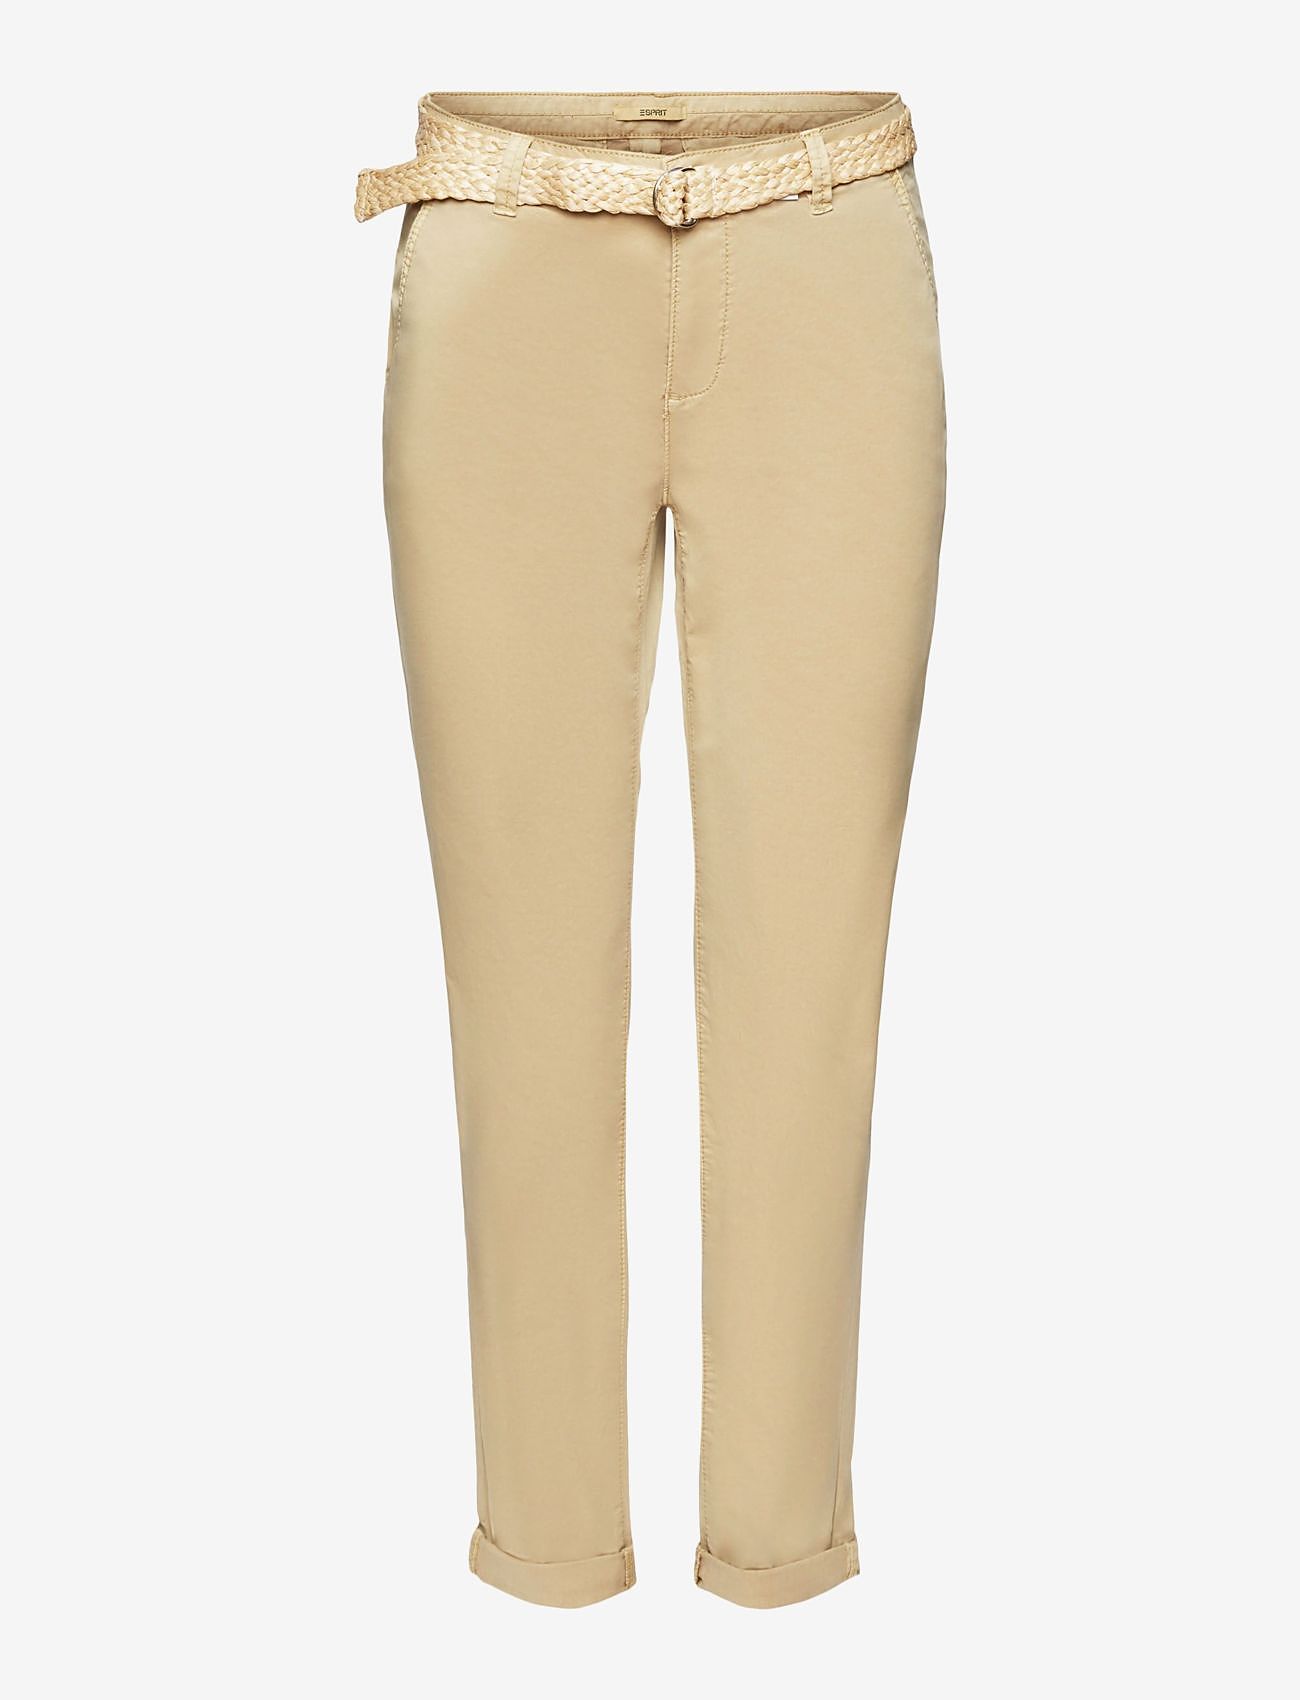 Esprit Casual - Cropped chinos - chinos - sand - 0